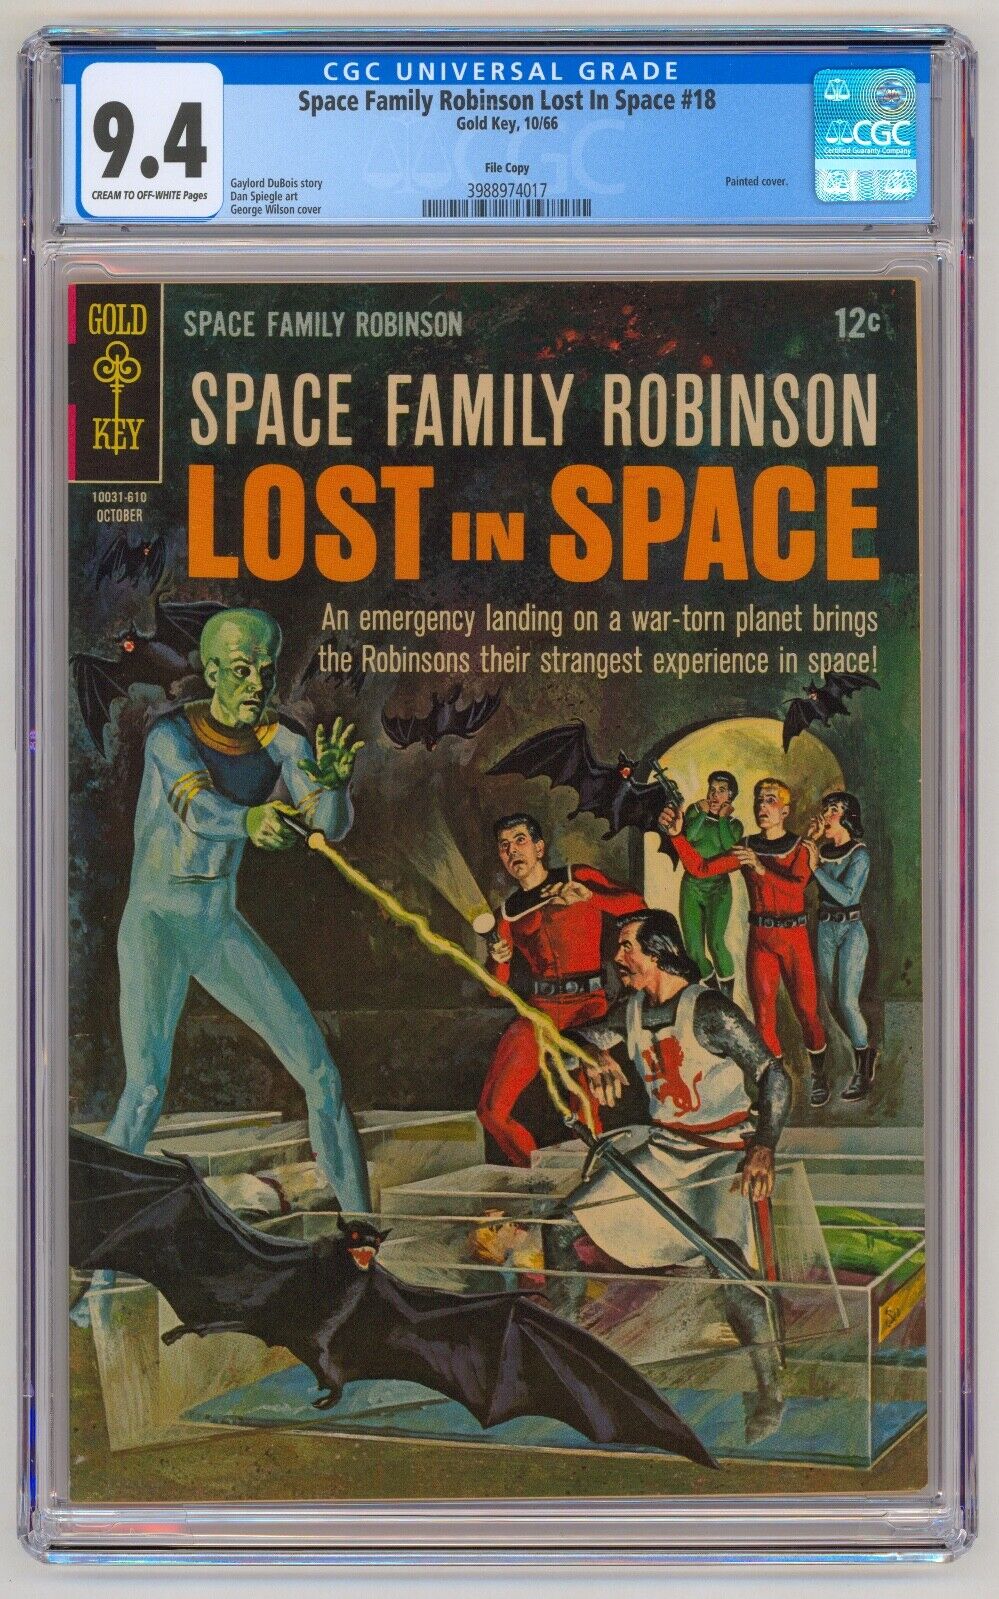 1967 Lost in Space Family Robinson #18 CGC 9.4 NM Gold Key * File Copy *